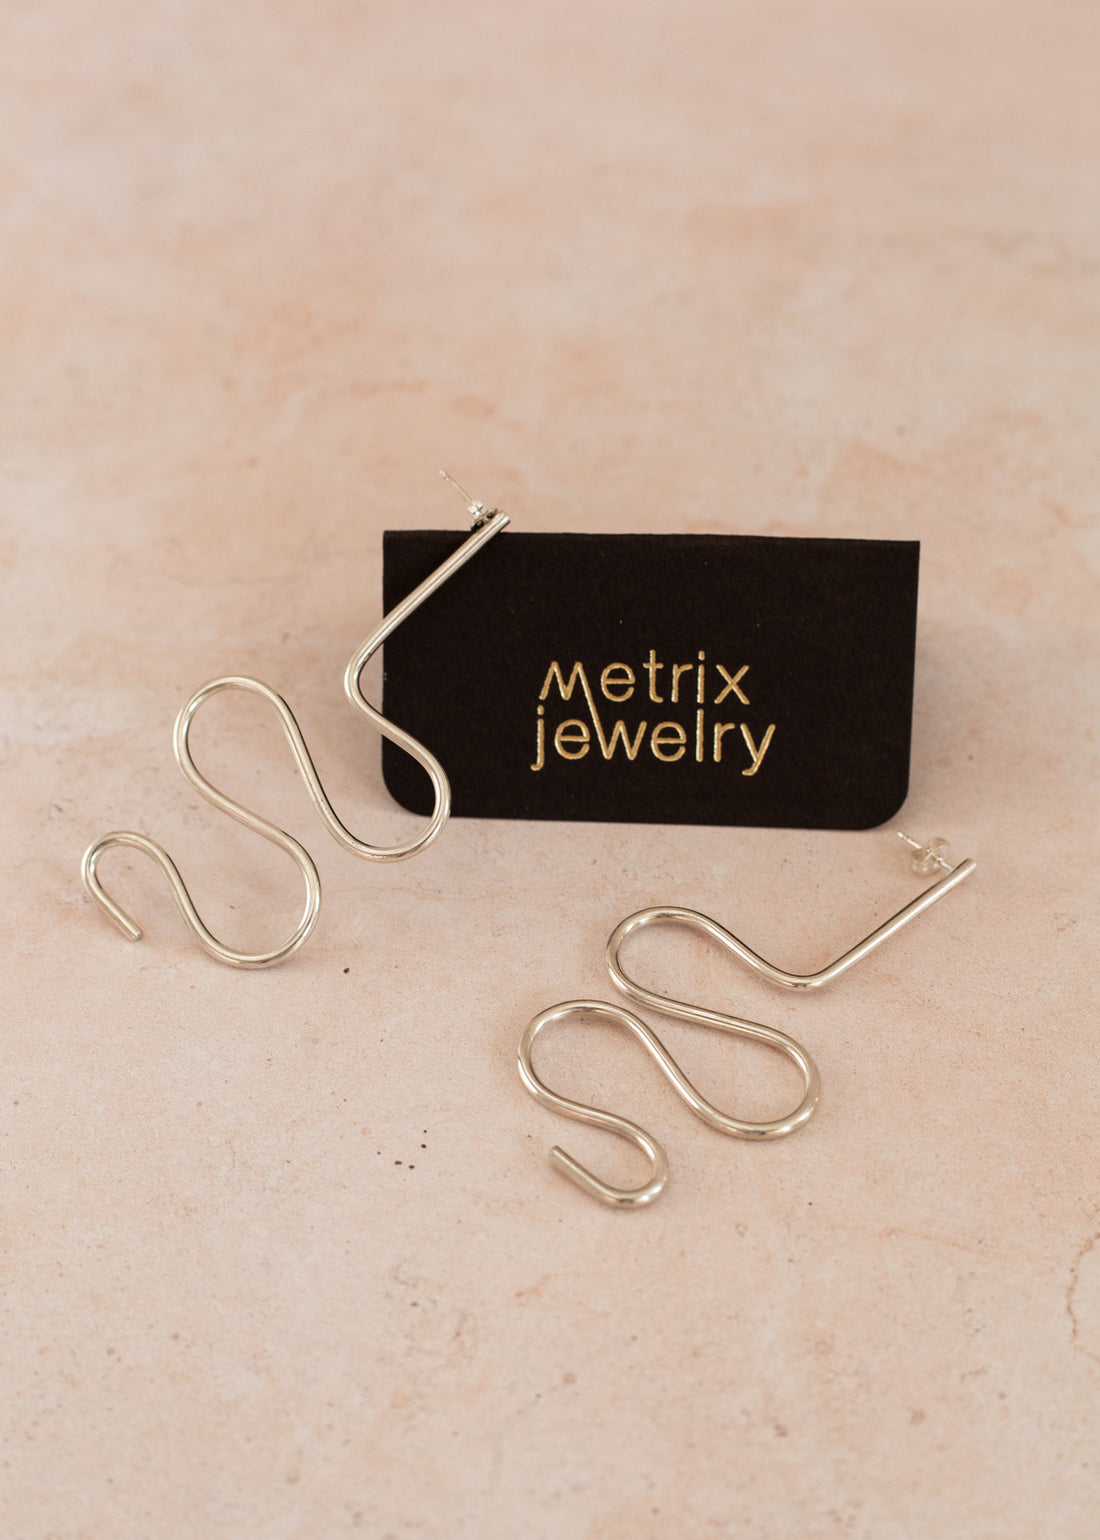 Two quiggle statement earrings in sterling silver on a light pink flatlay and a black jewelry card stating "metrix jewelry"